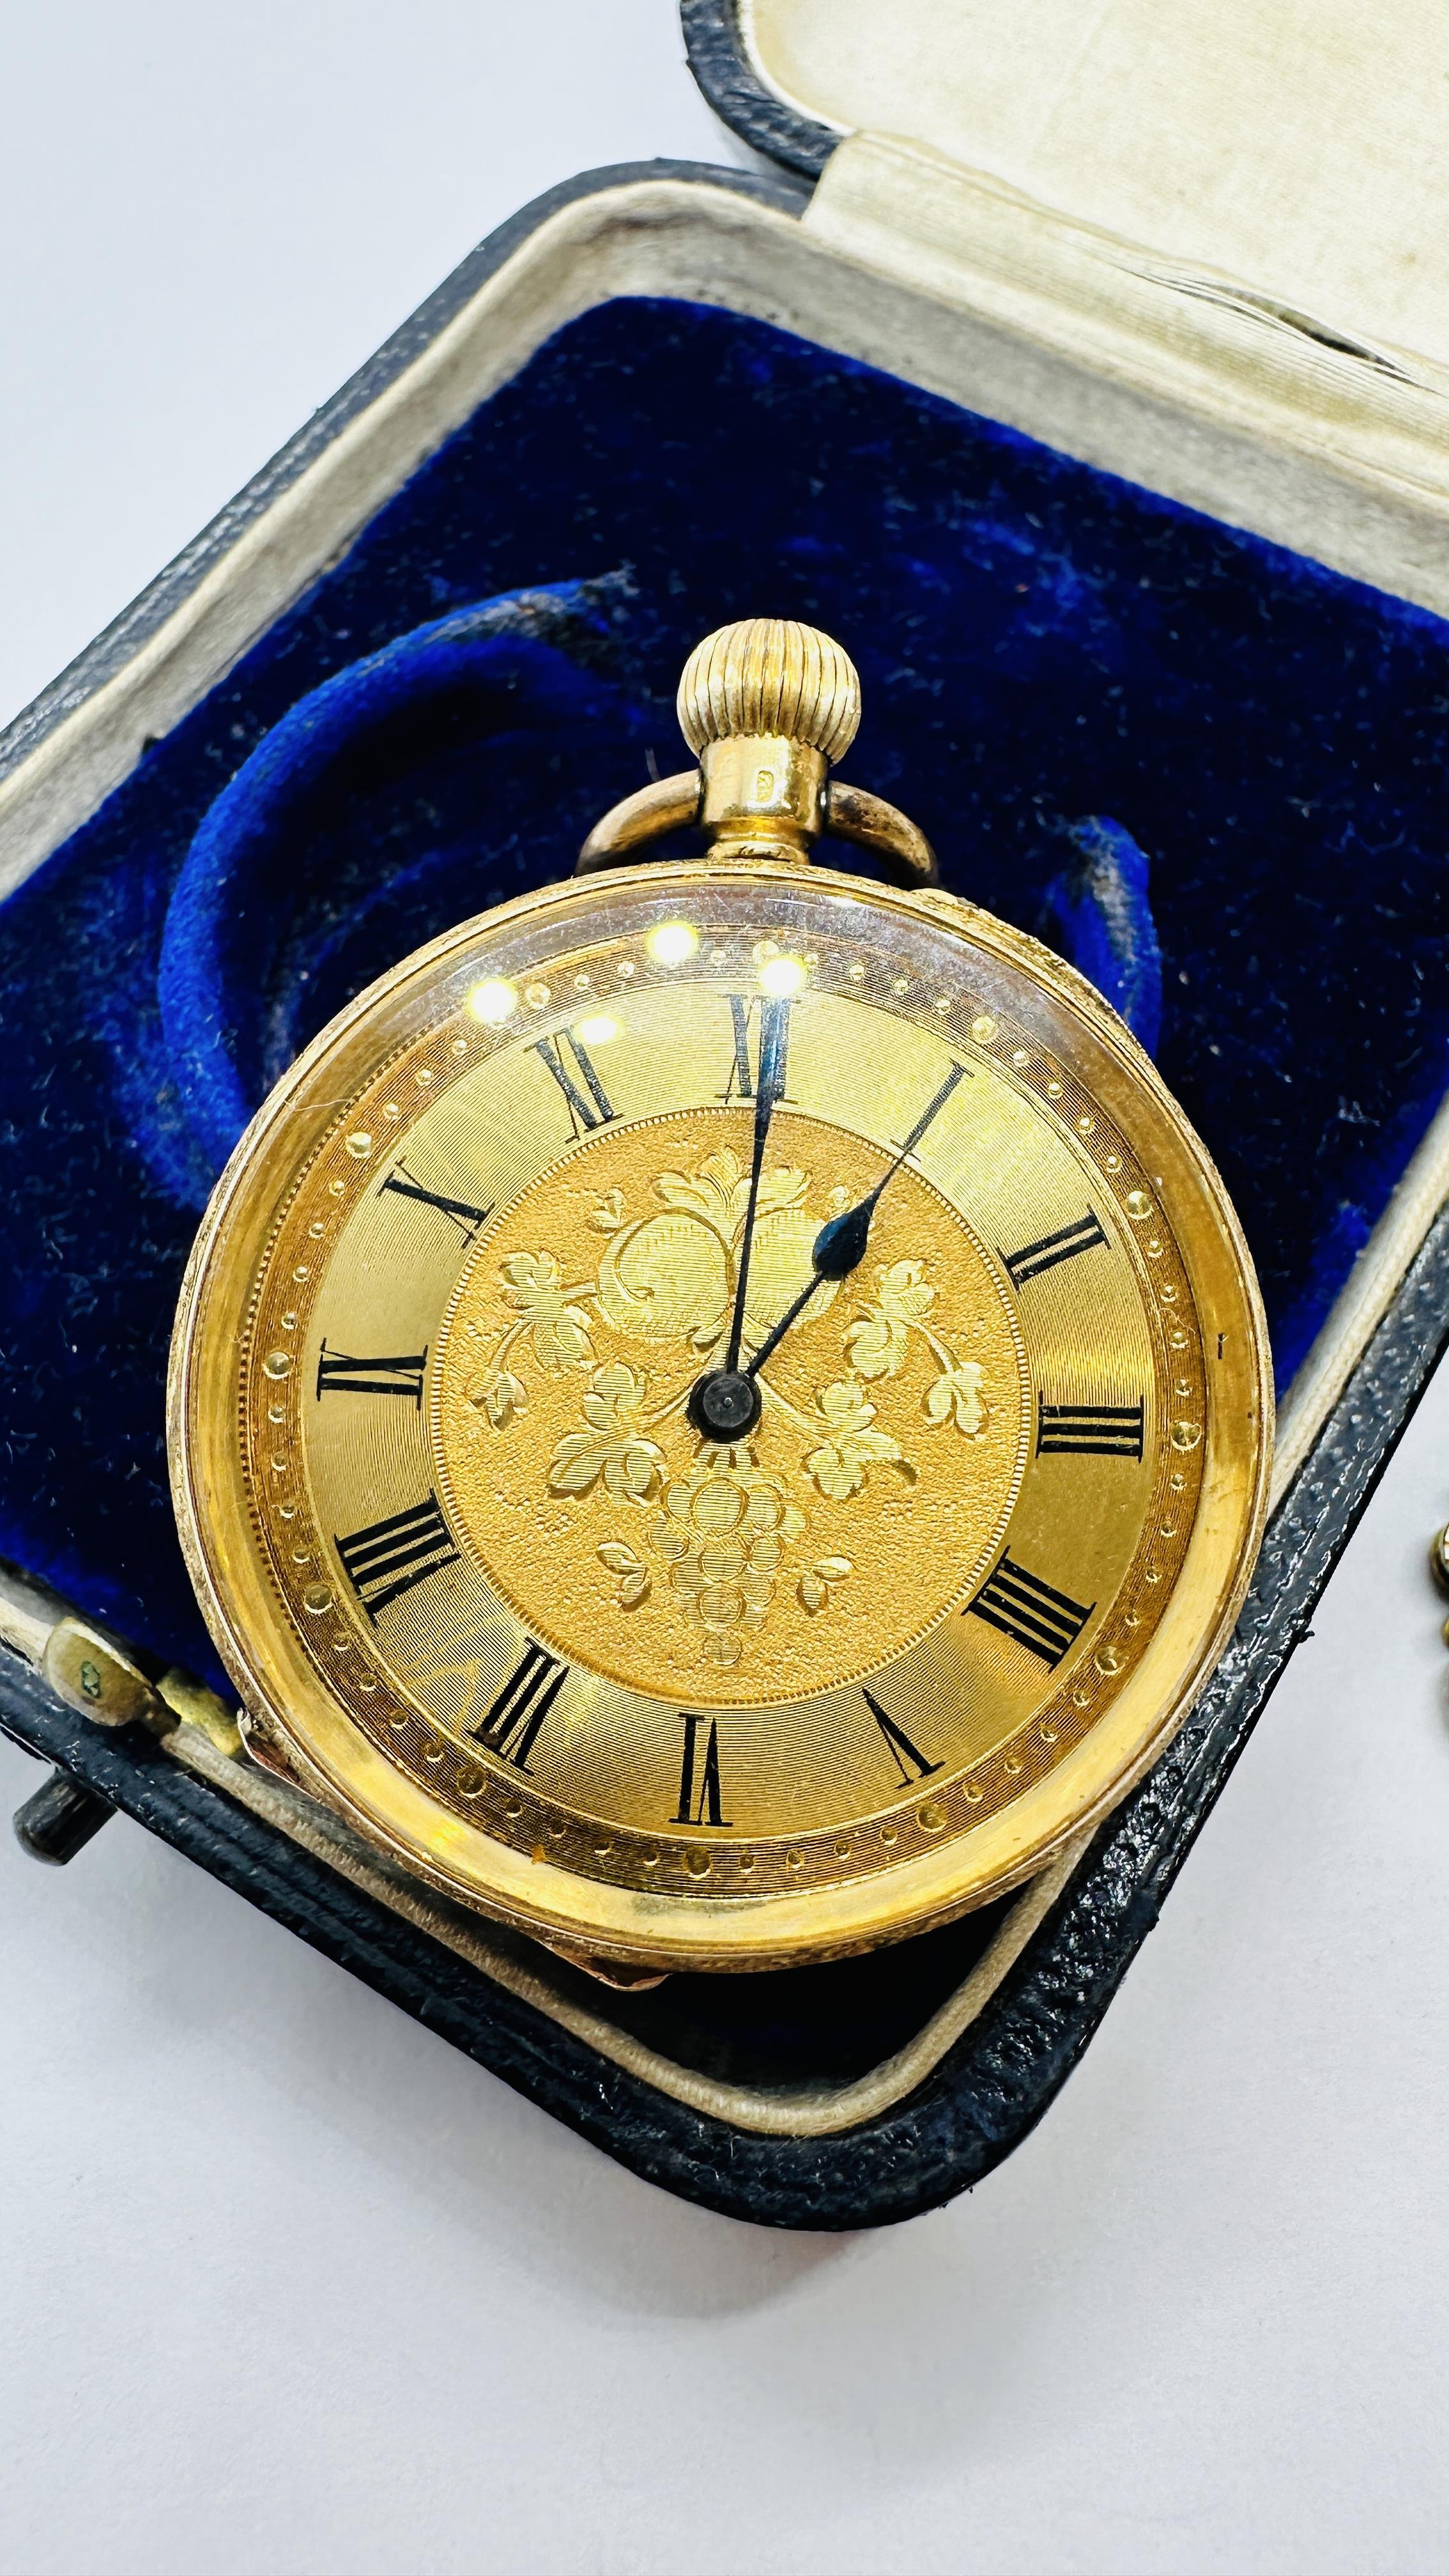 AN ELABORATE ANTIQUE 18CT GOLD CASED HALF HUNTER POCKET WATCH ALONG WITH A WOVEN WATCH CHAIN, - Image 8 of 17